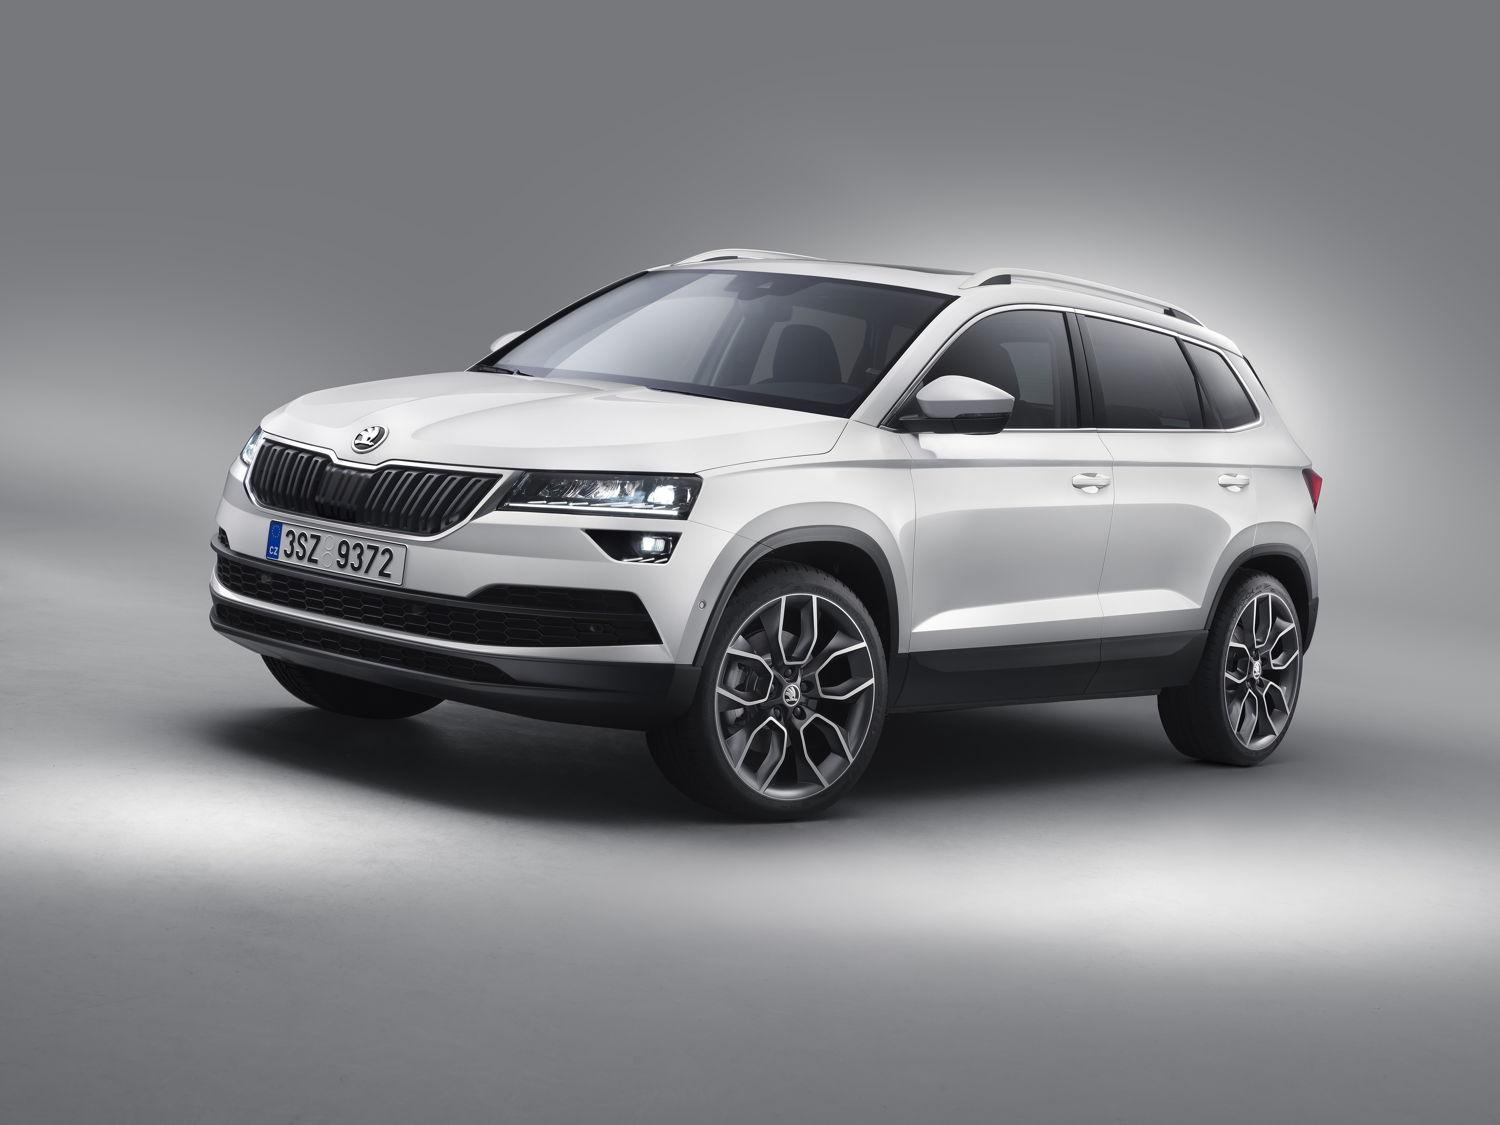 ŠKODA continues its SUV campaign with ŠKODA KAROQ. The compact SUV is now available to order.